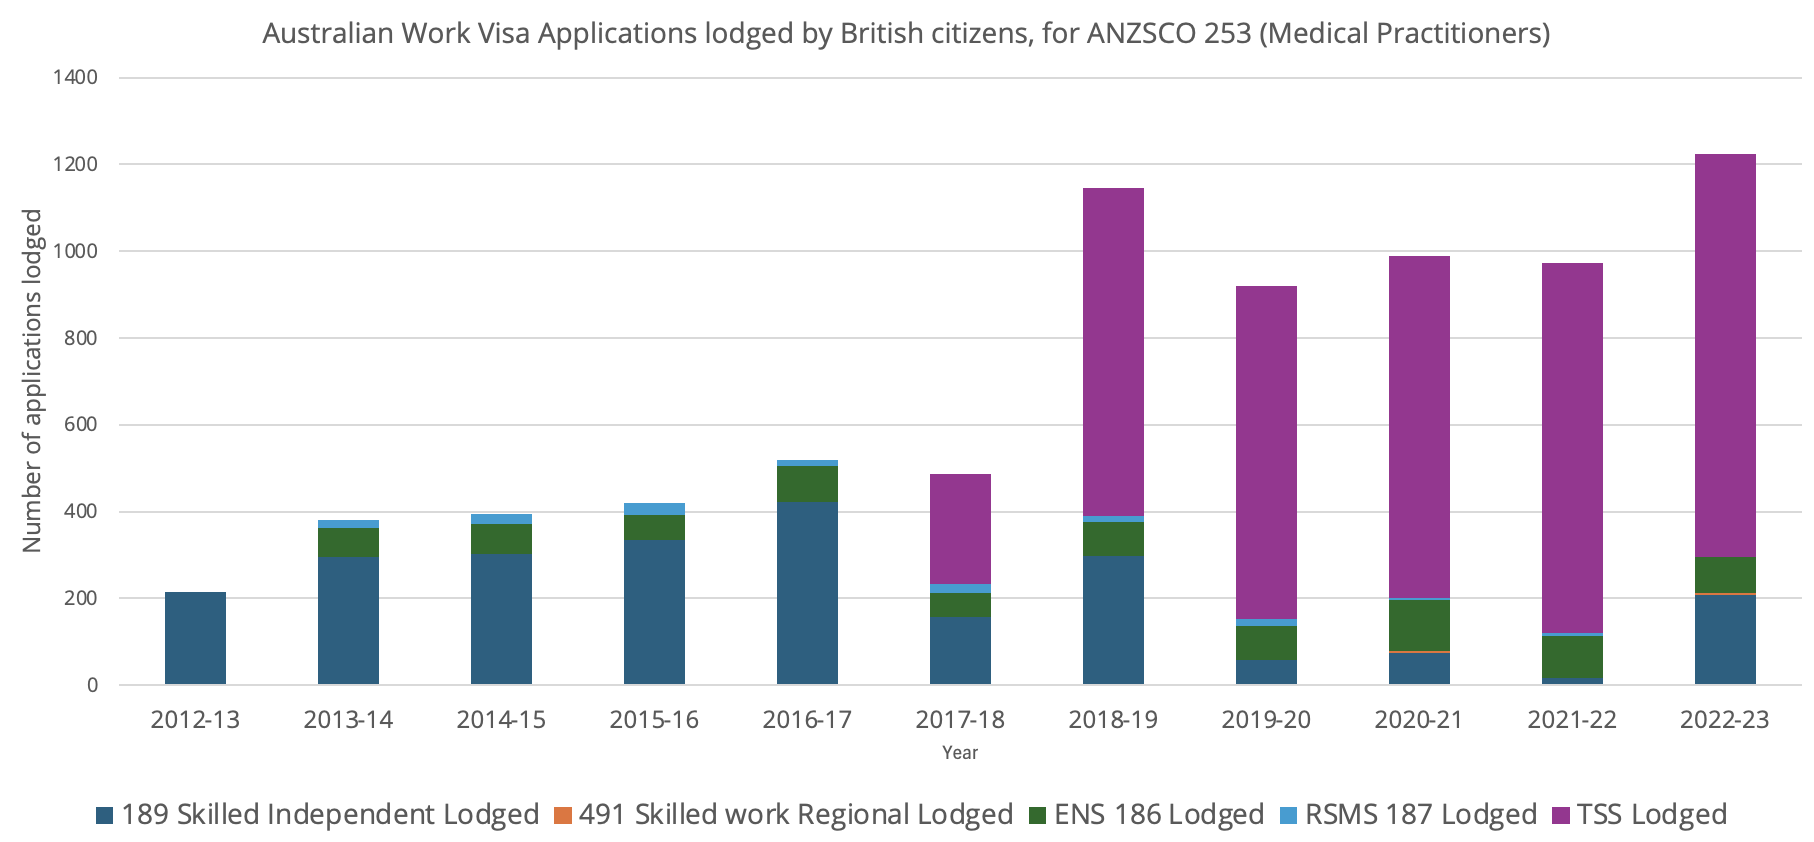 Graph of data in above table, showing number of applications increasing year-on-year.